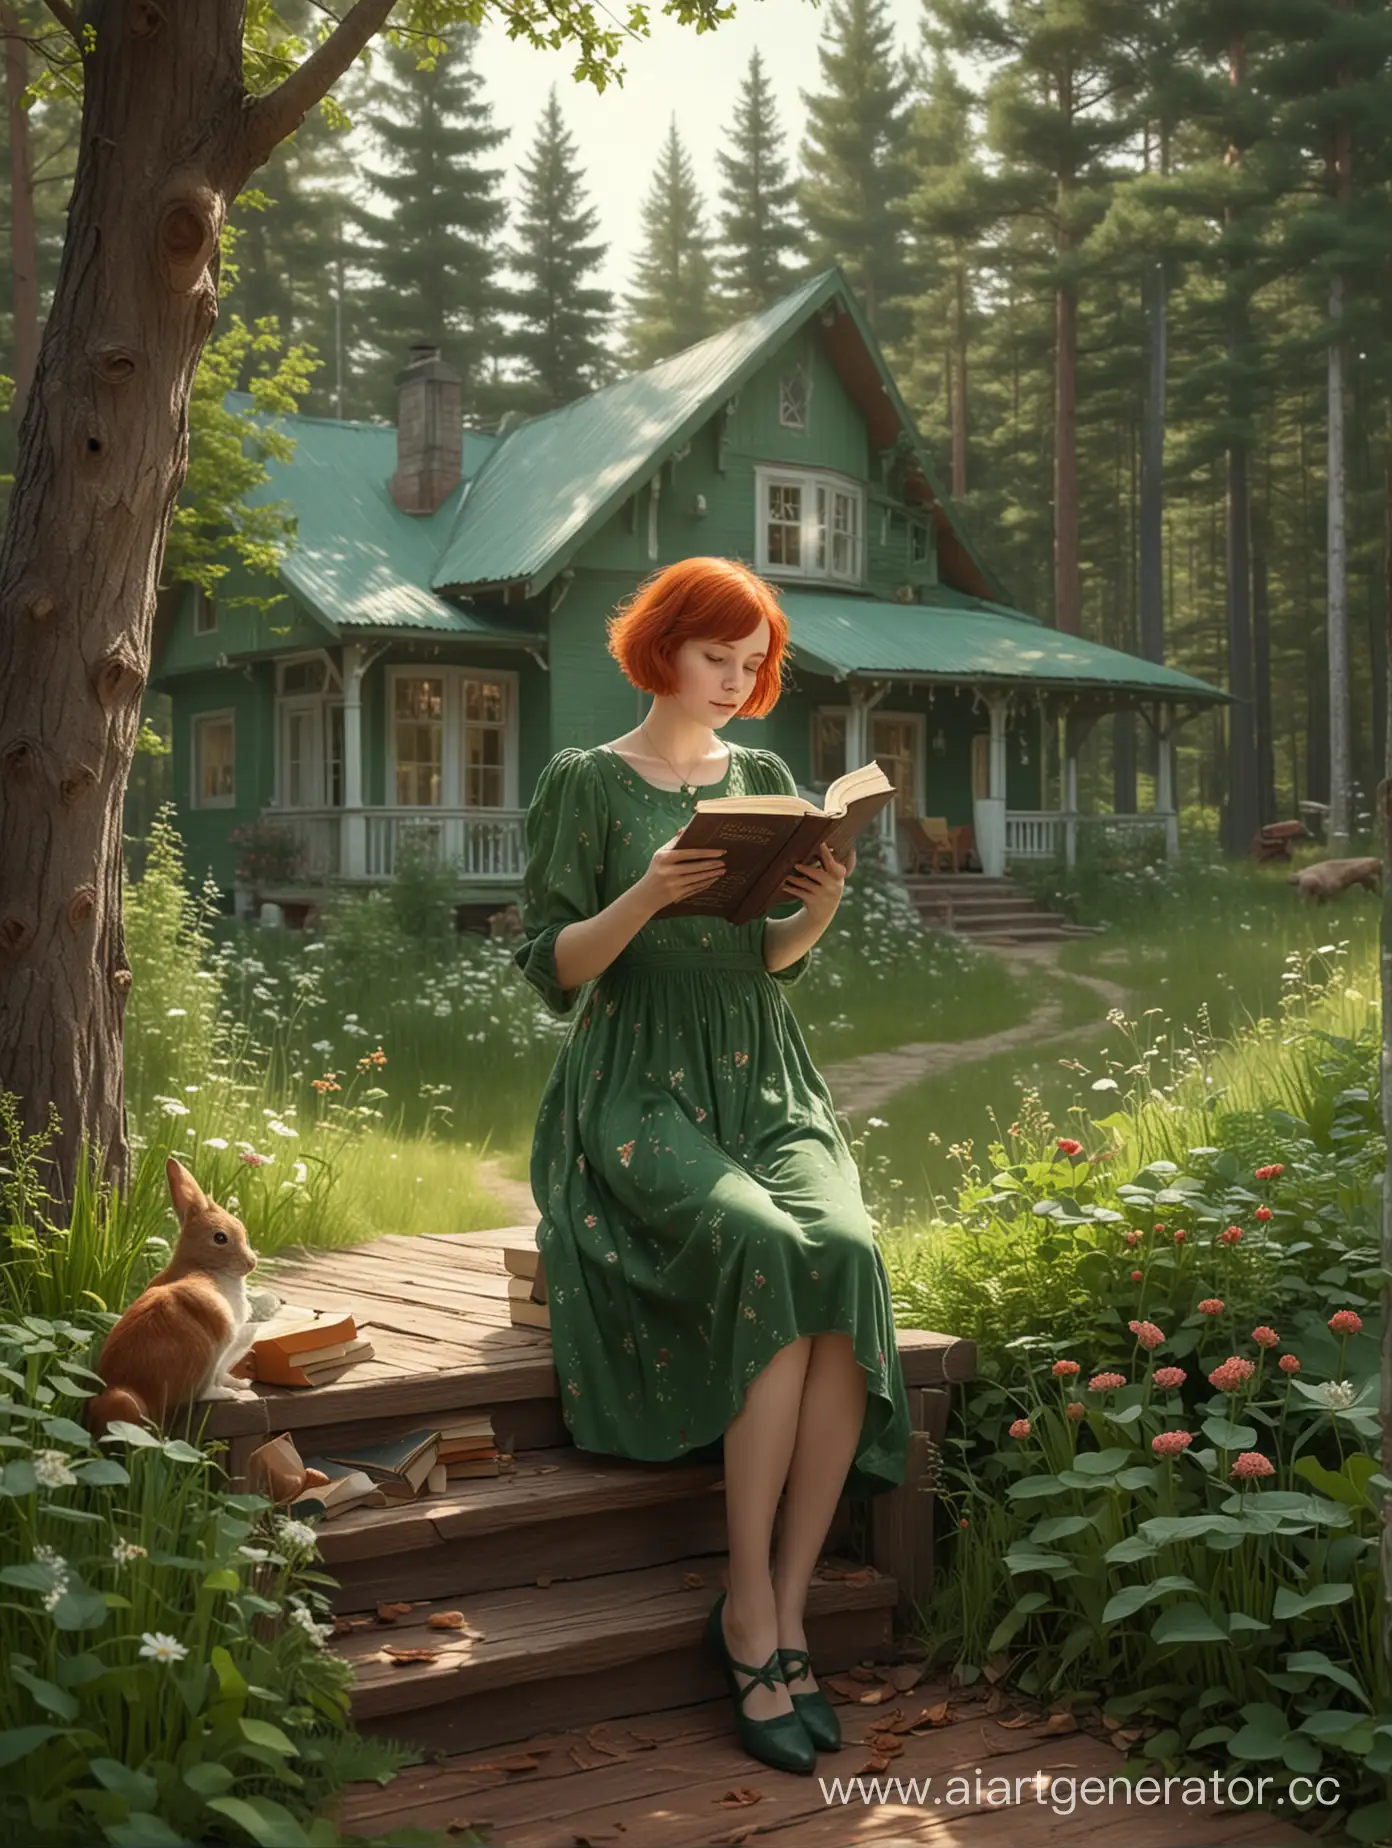 Enchanting-Witch-Girl-Reading-in-a-Springtime-Forest-Porch